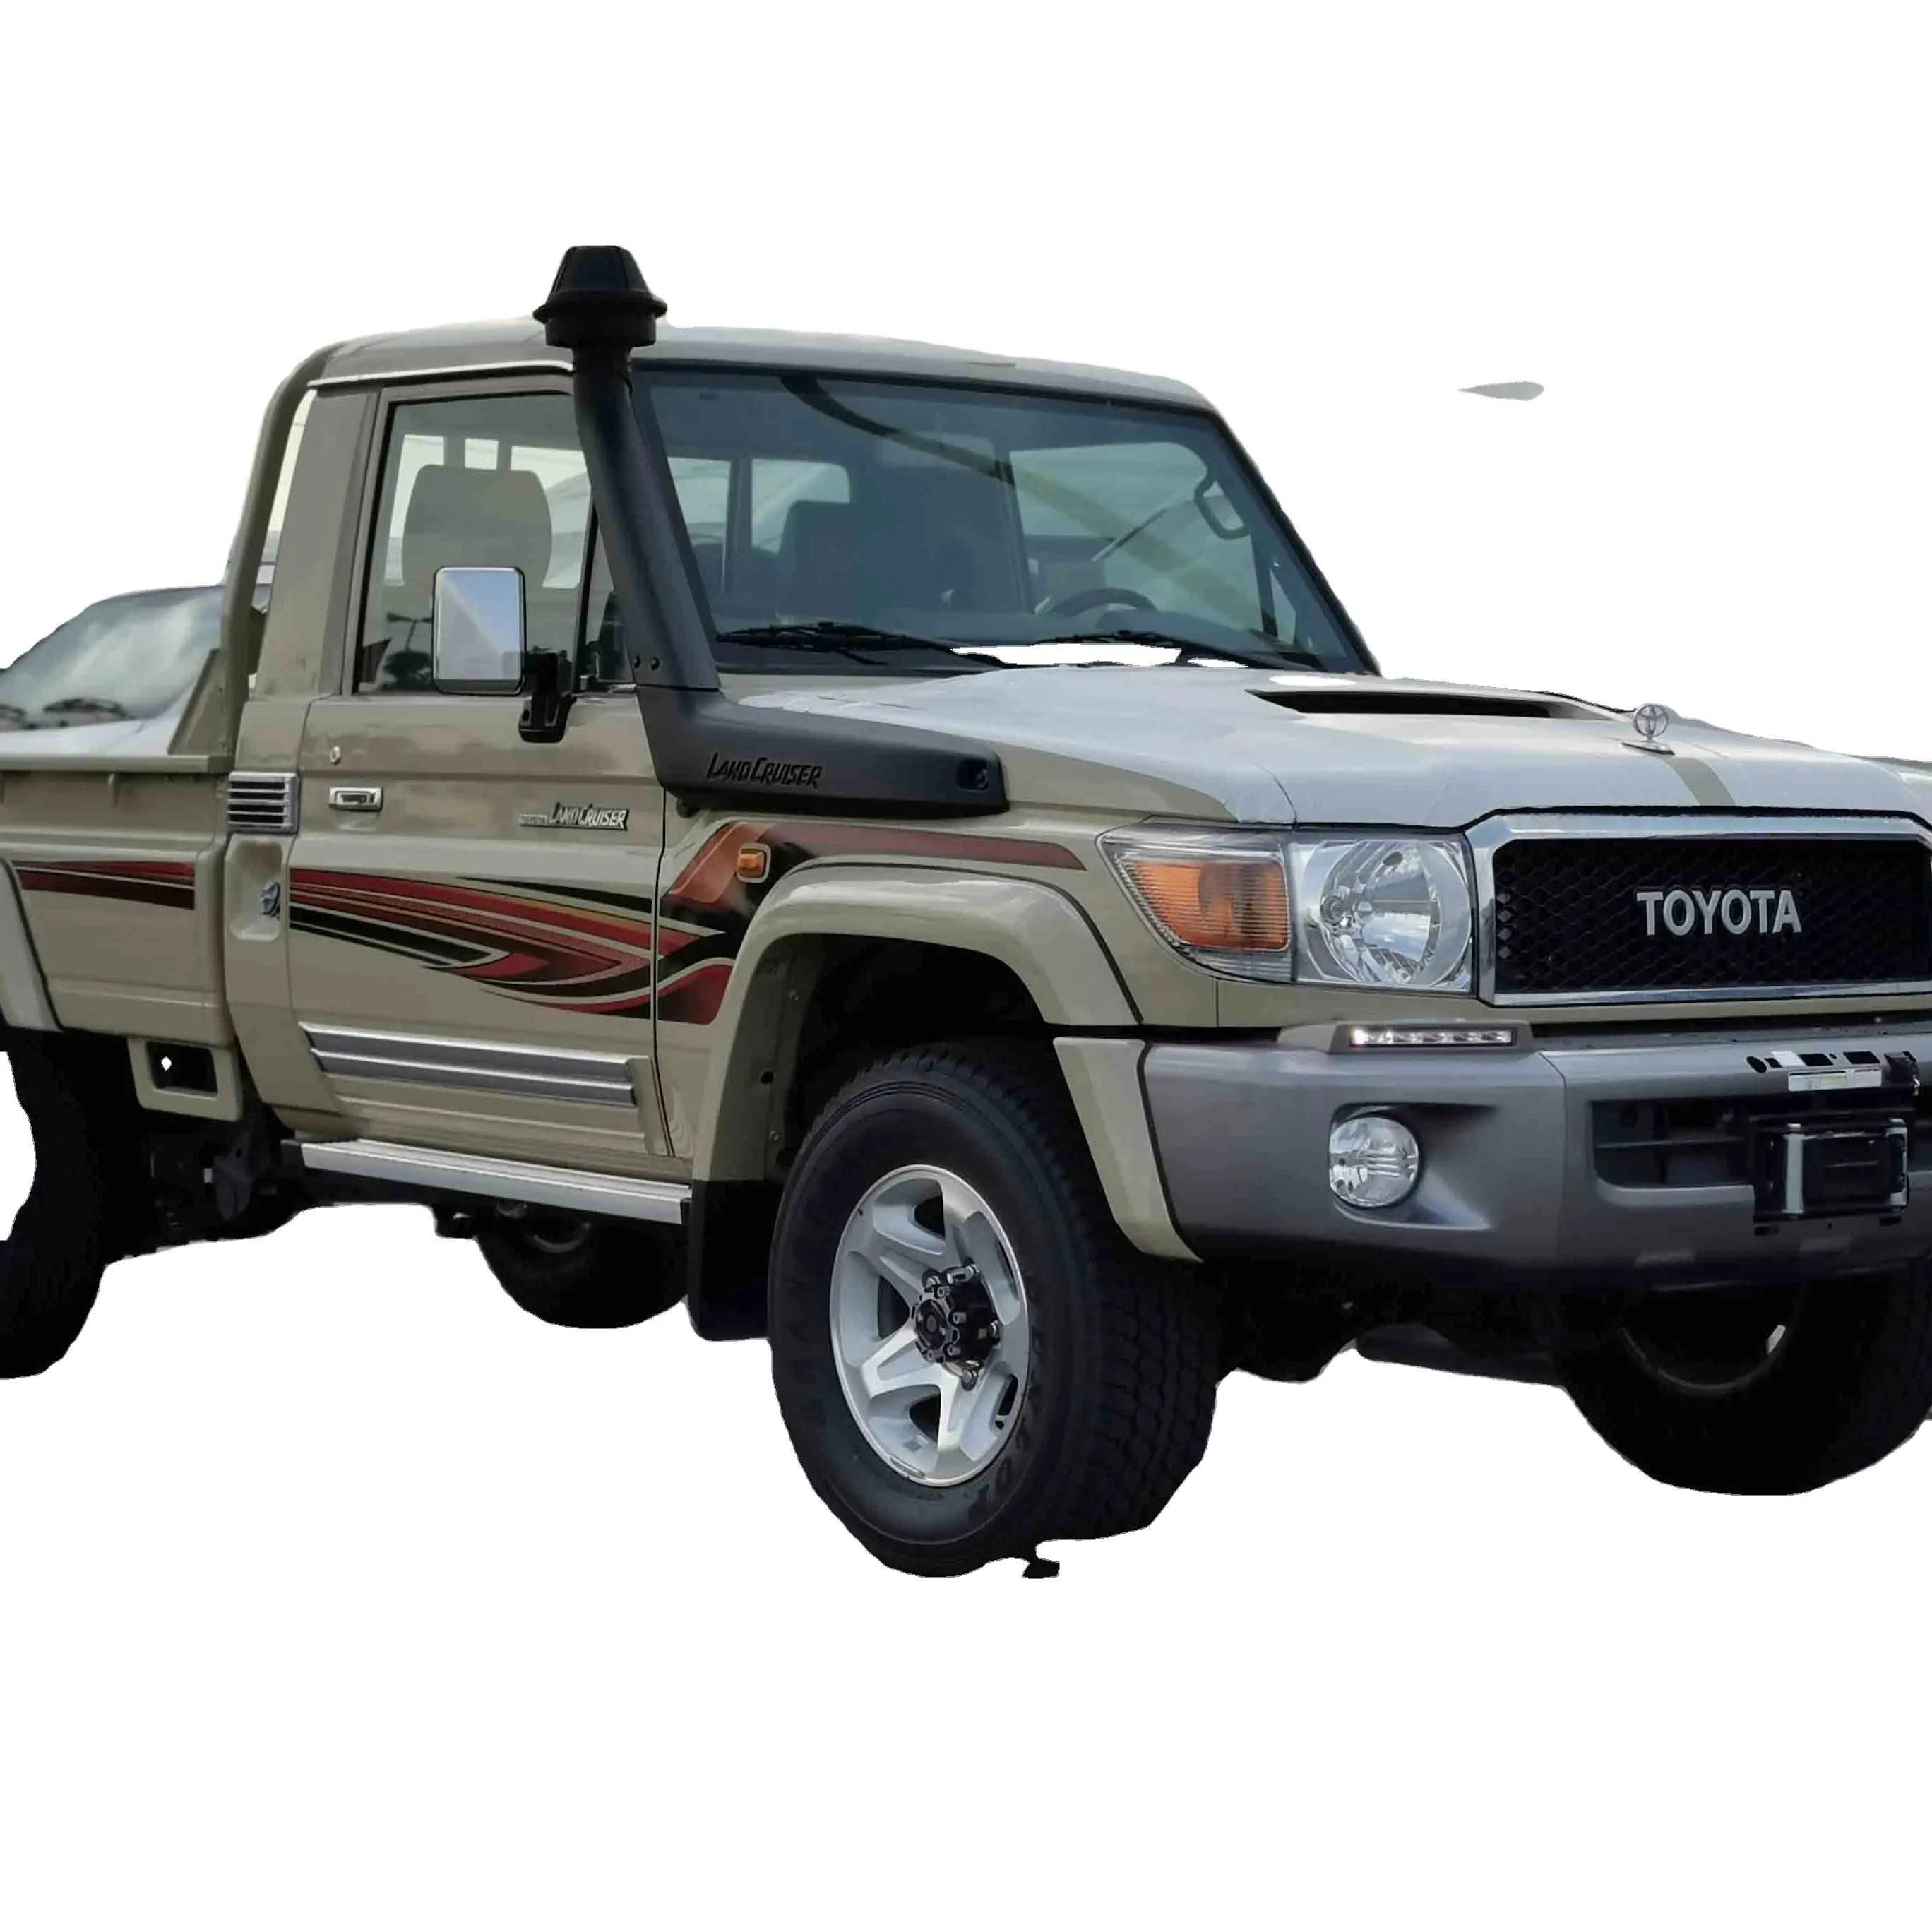 2022 Toy ota Land Cruiser Single Cabin Pickup V8 Used Cheap Cars from Japan Dubai Germany for Sale Hot Sale Diesel Petrol Engine